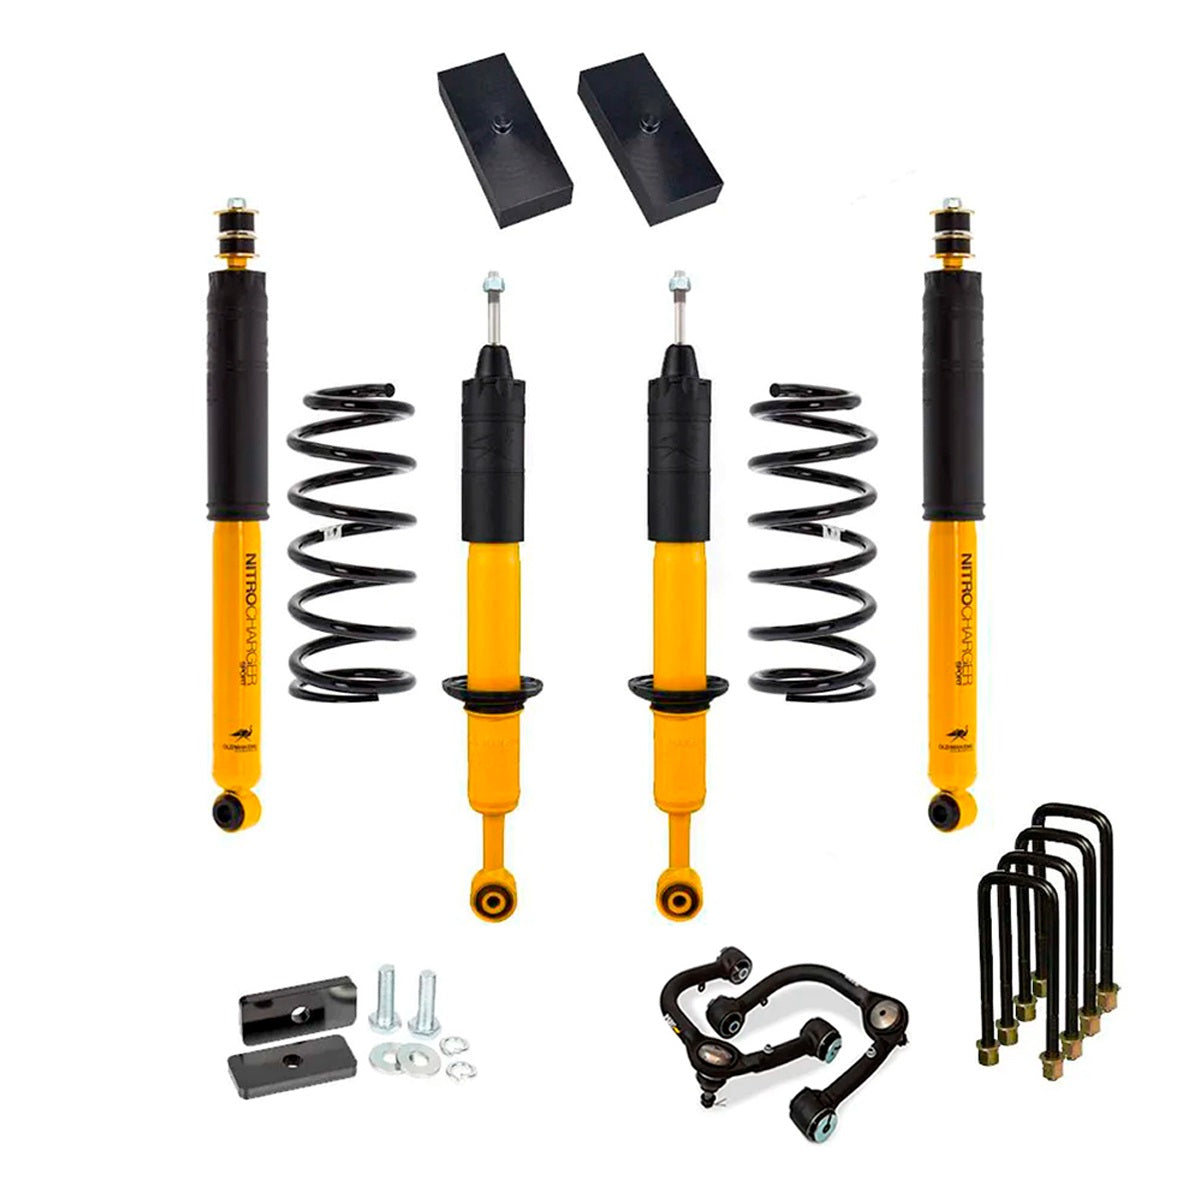 OME 3 inch Essentials Lift Kit for Tacoma (05-15) - Front Shocks Assembly